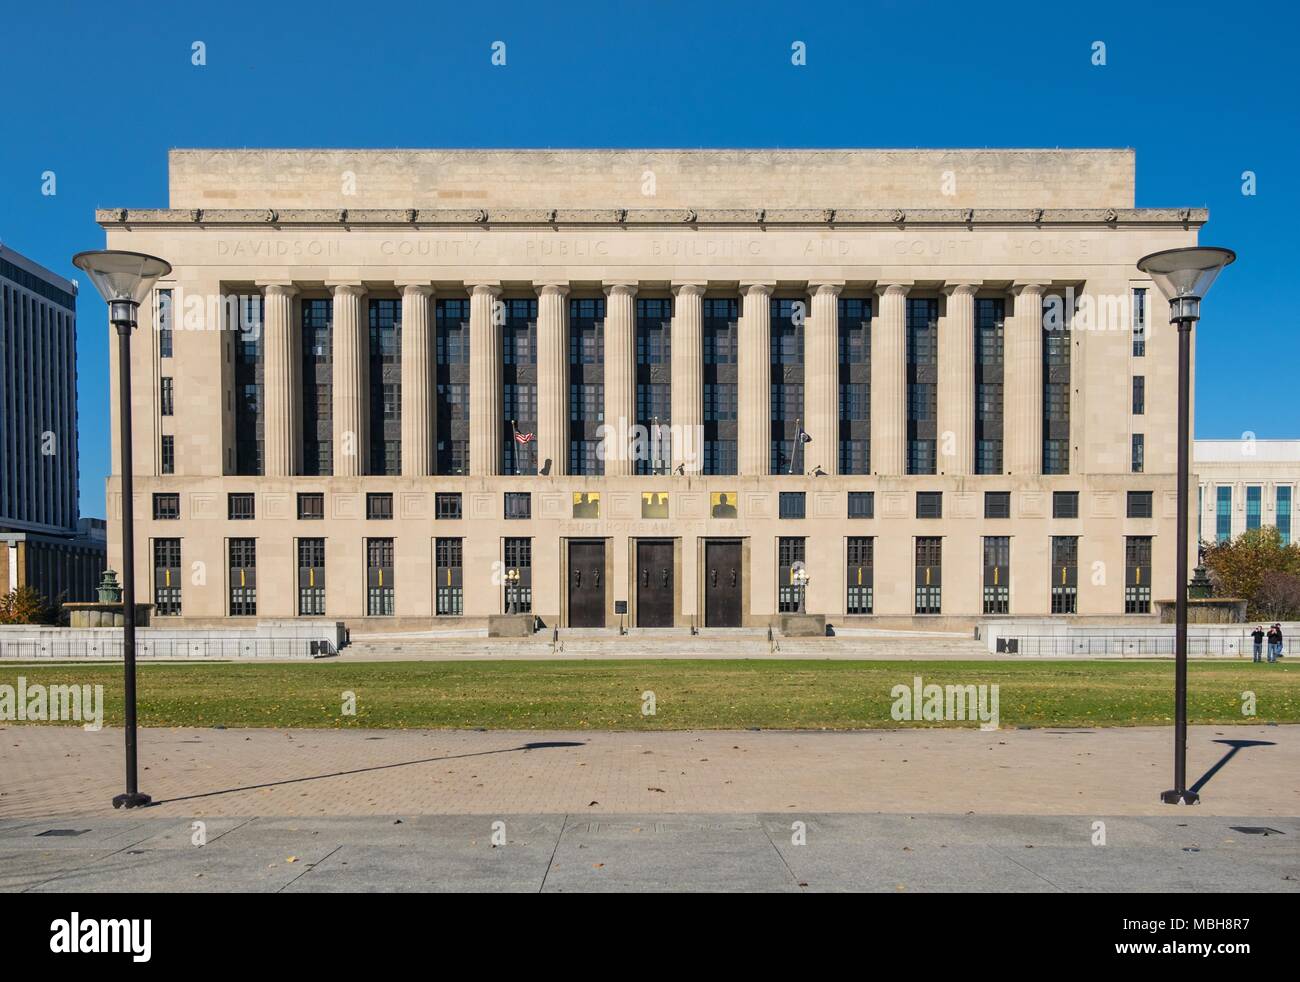 Davidson County Public Building and Court House in Nashville,Tennessee, USA. Stock Photo